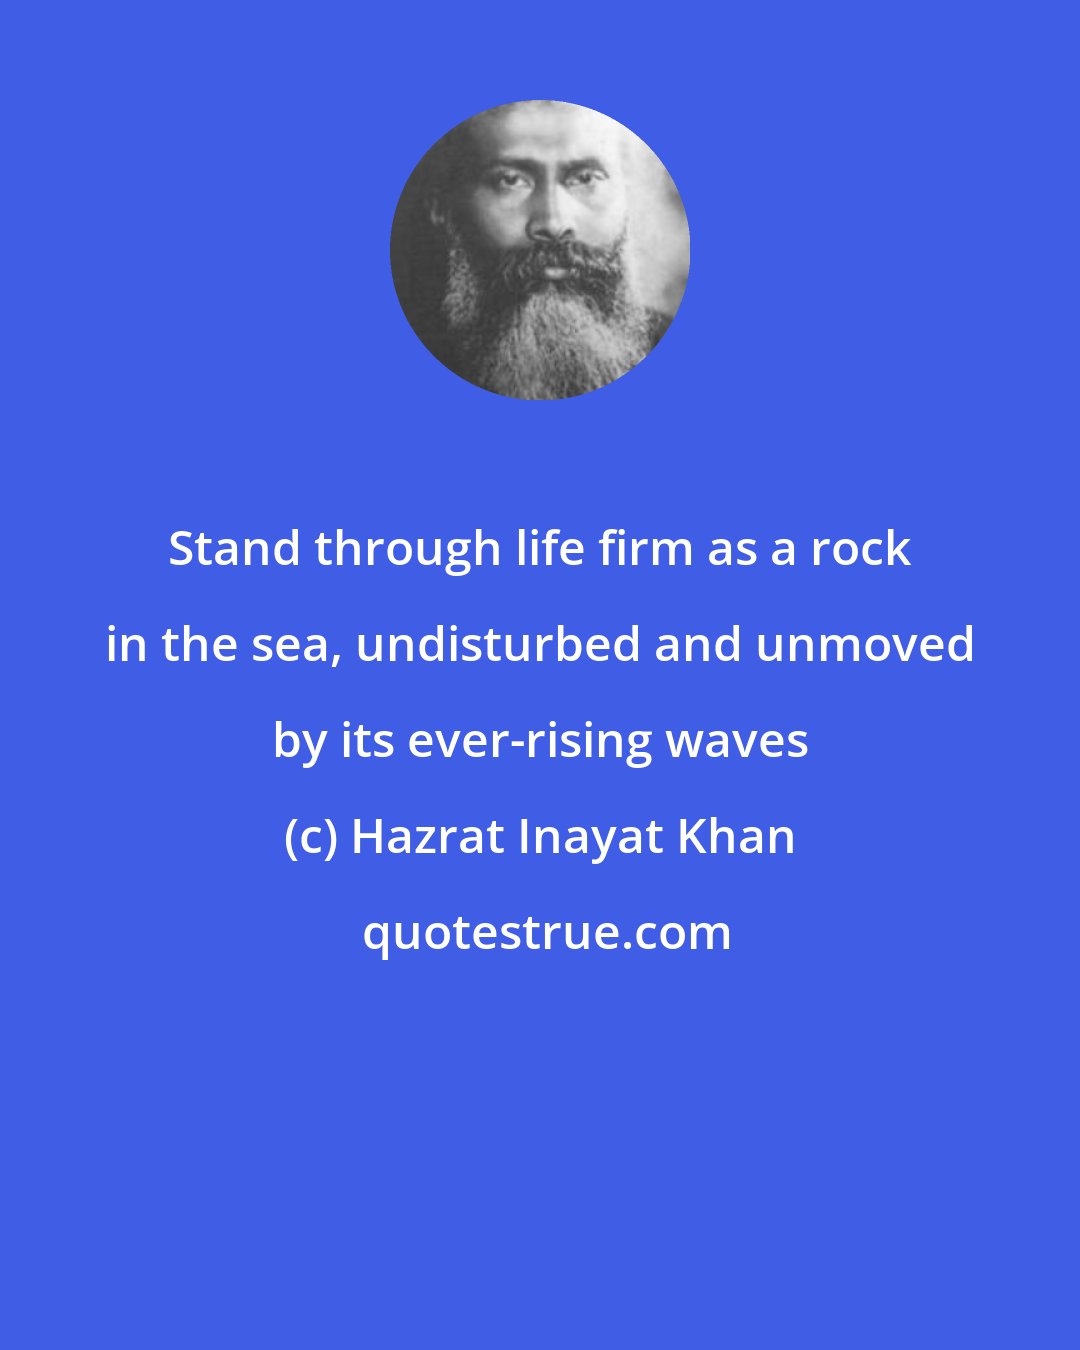 Hazrat Inayat Khan: Stand through life firm as a rock in the sea, undisturbed and unmoved by its ever-rising waves